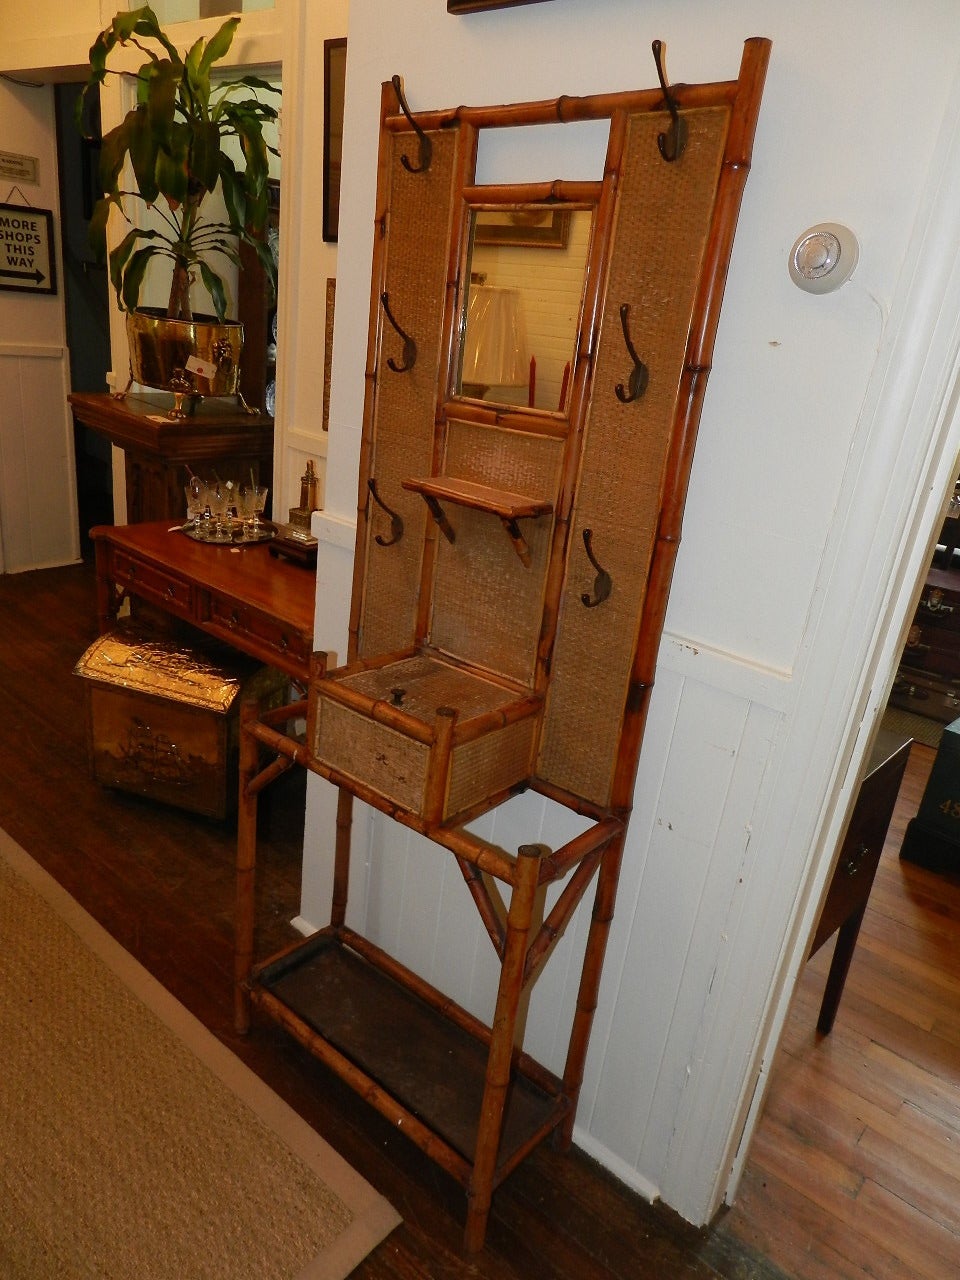 Bamboo coat/hat rack with six iron coat hooks,mirror and glove box.There are  two compartments for walking sticks or umbrellas .The original metal drip tray is still present.